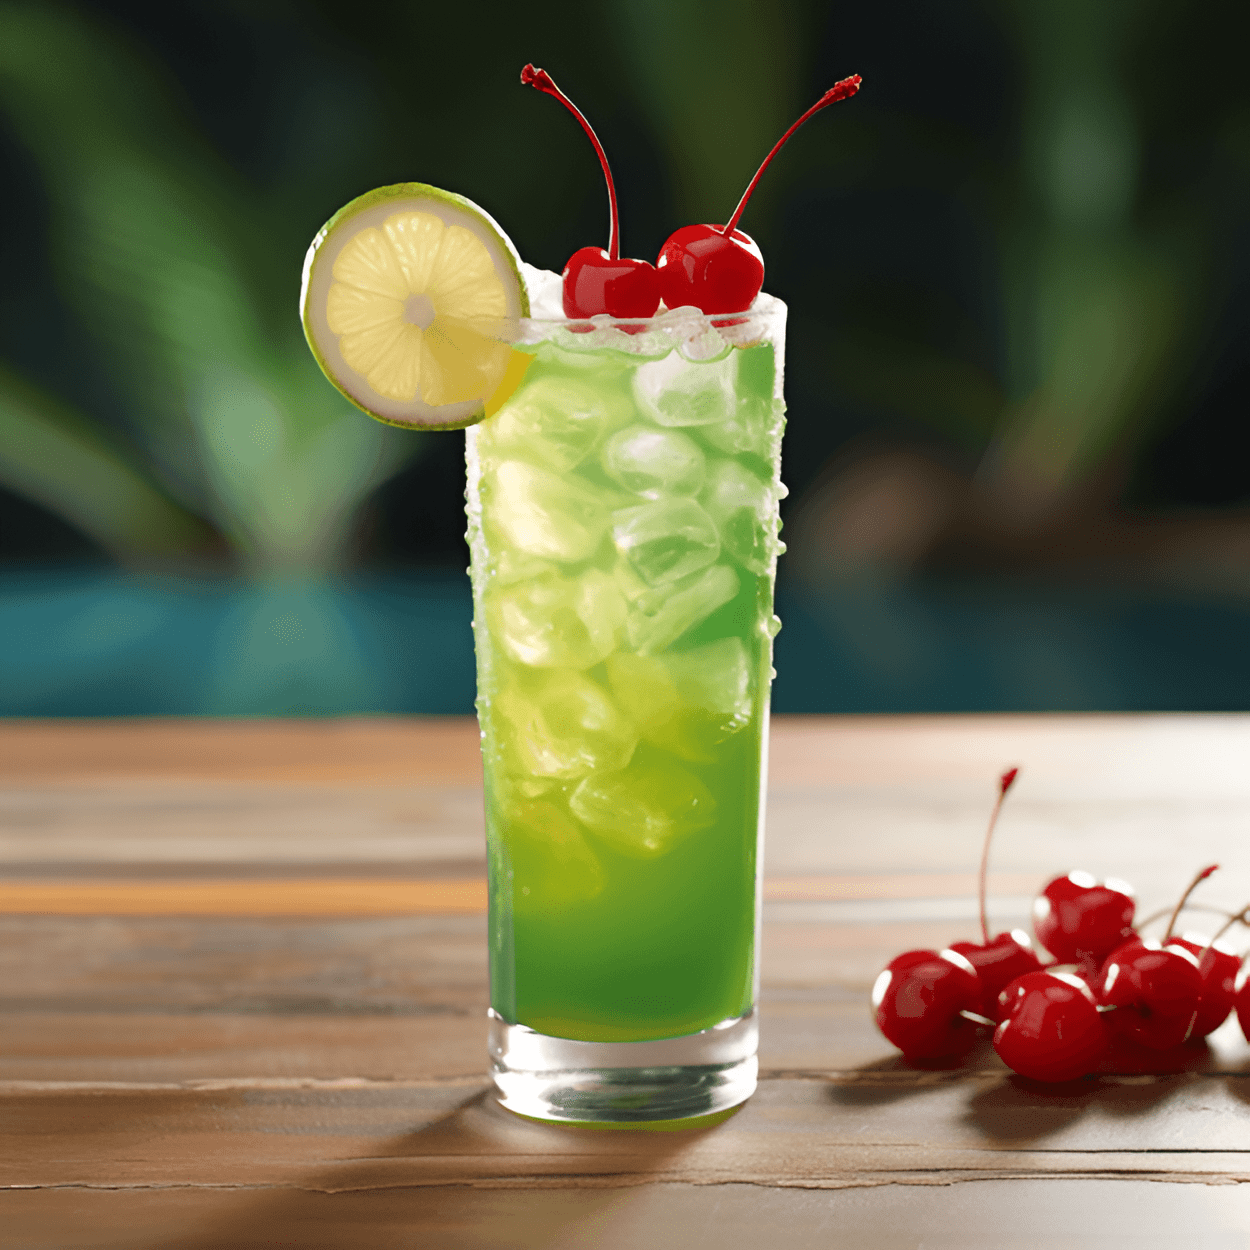 June Bug Cocktail Recipe - The June Bug cocktail is a sweet, fruity delight. It has a tropical taste with a delightful mix of coconut, banana, and pineapple flavors. The sweetness is balanced by the tartness of the lime, creating a refreshing and vibrant taste.